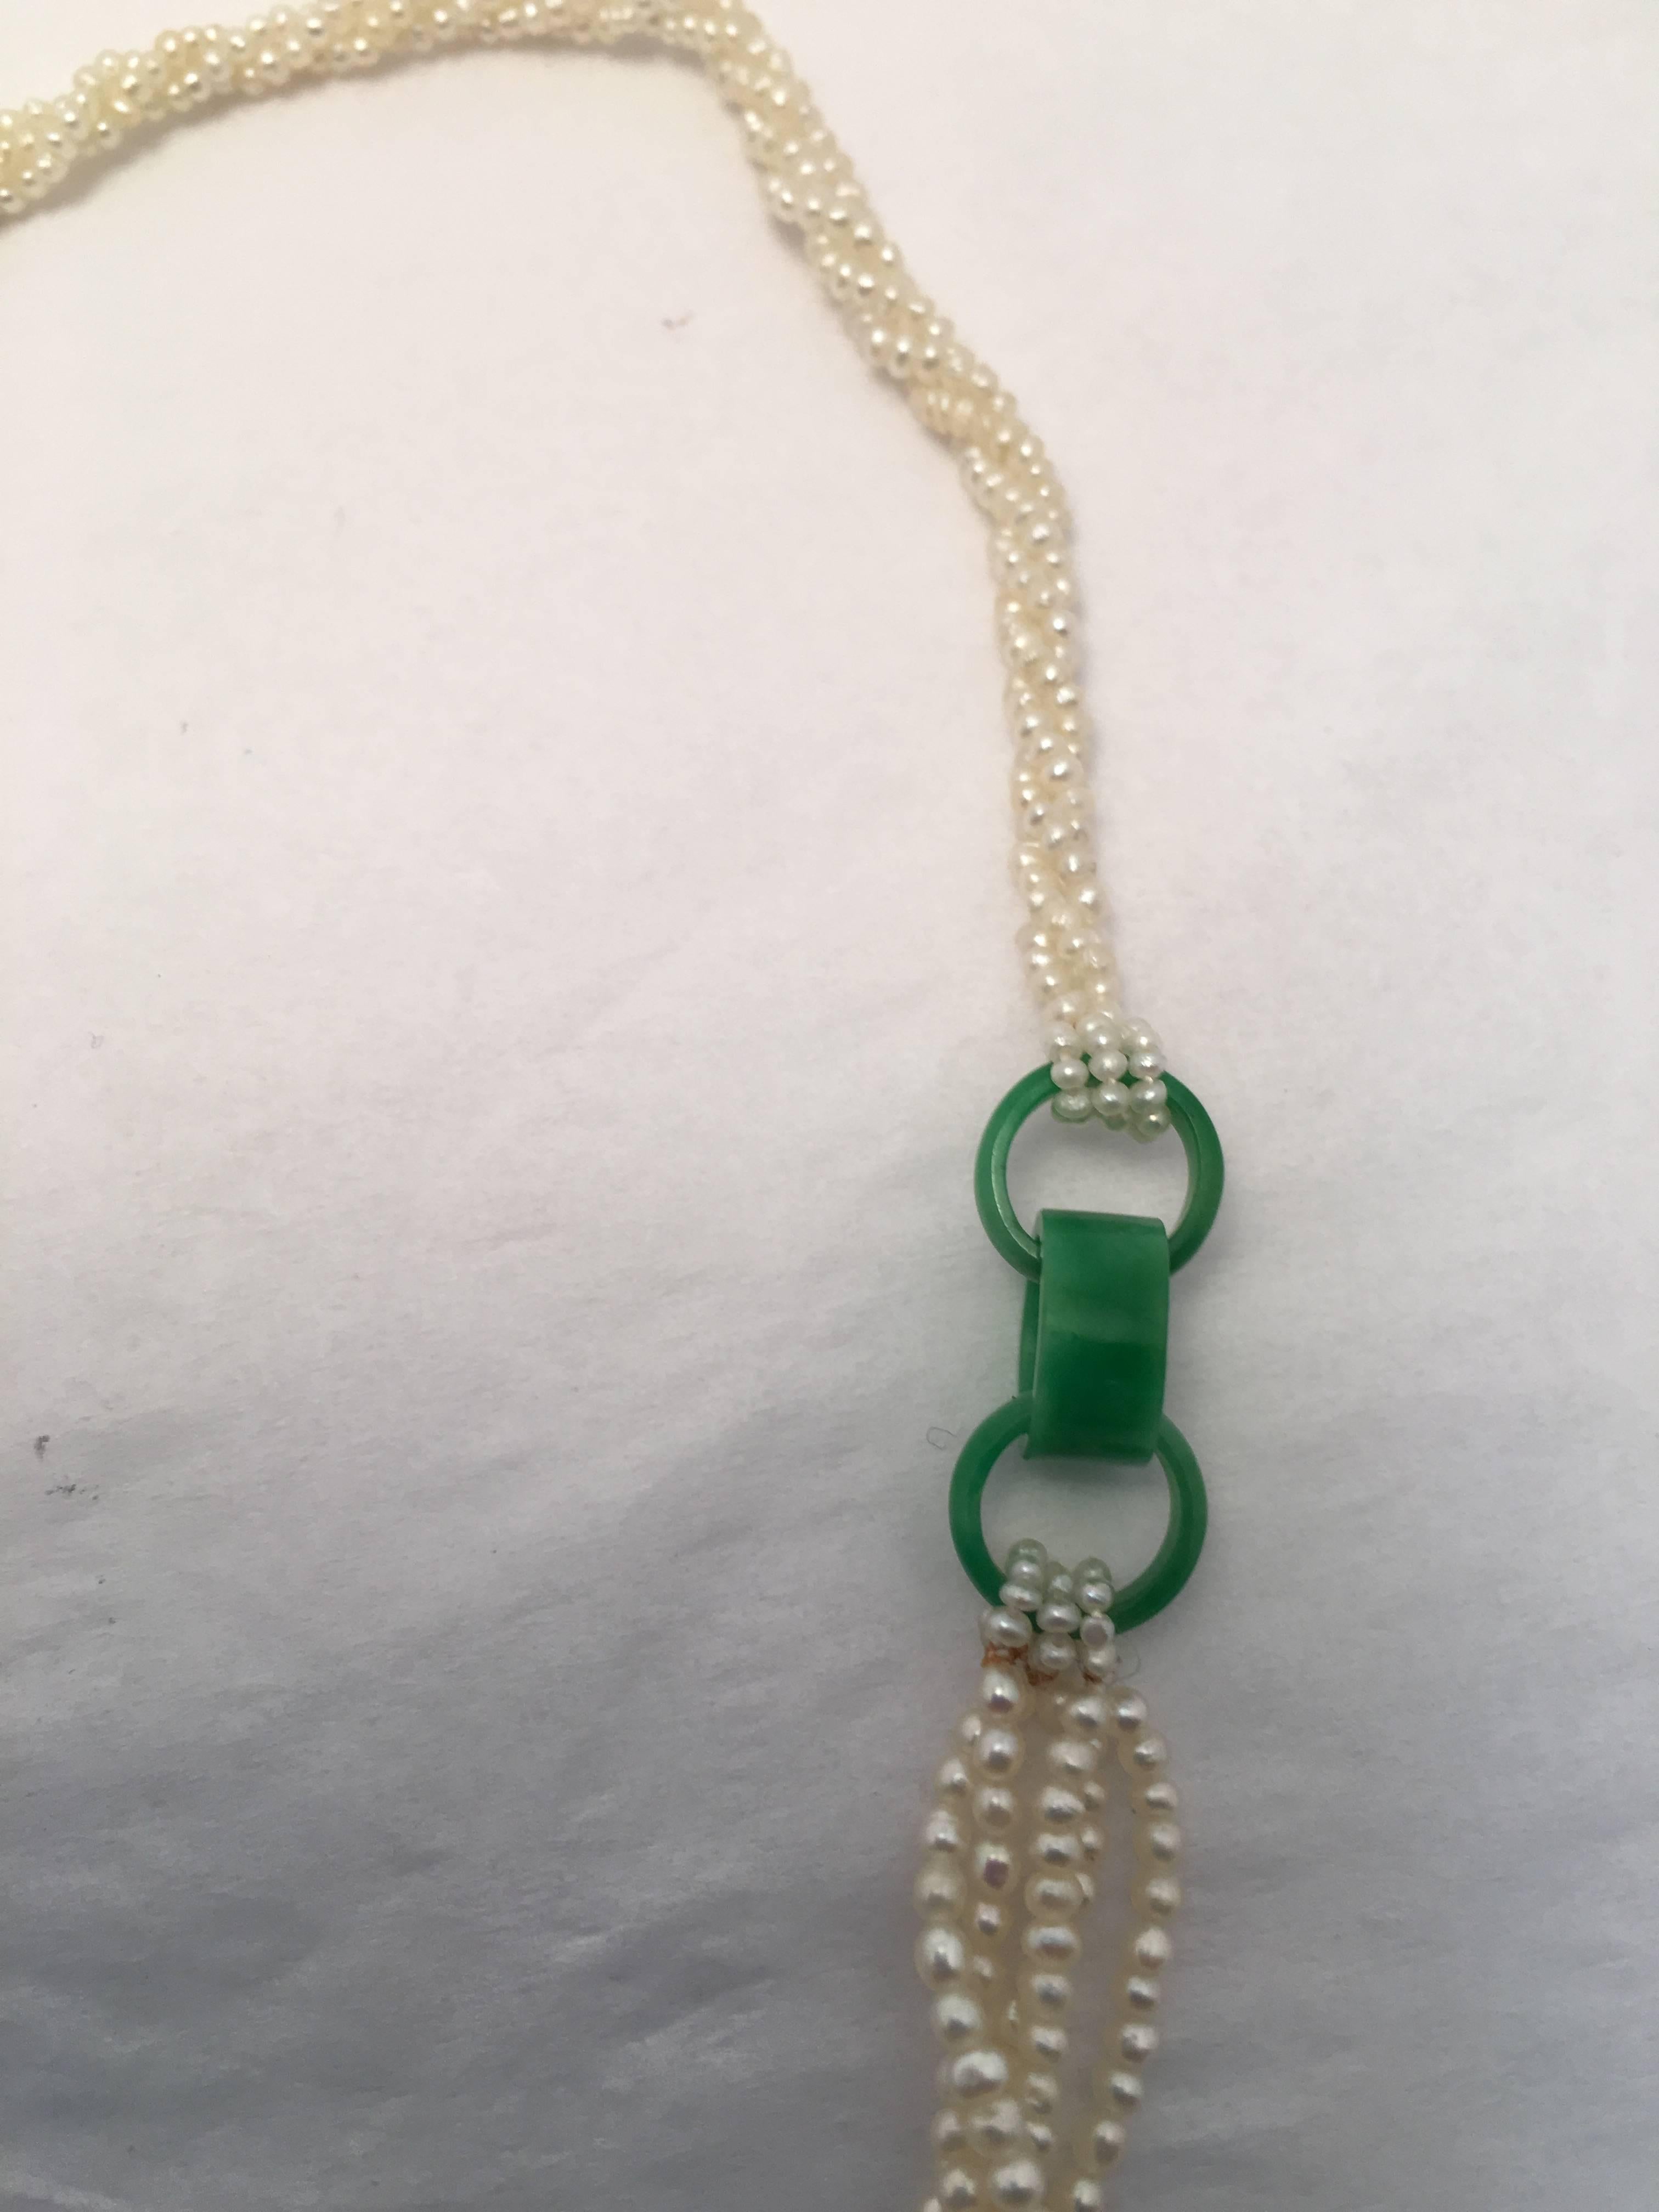 This dainty necklace consists of three twisted strands of natural seed pearls toward the back which attach to three interlocking rings of jade.  The front of the necklace consists of five strands of slightly larger twisted natural seed pearls. 